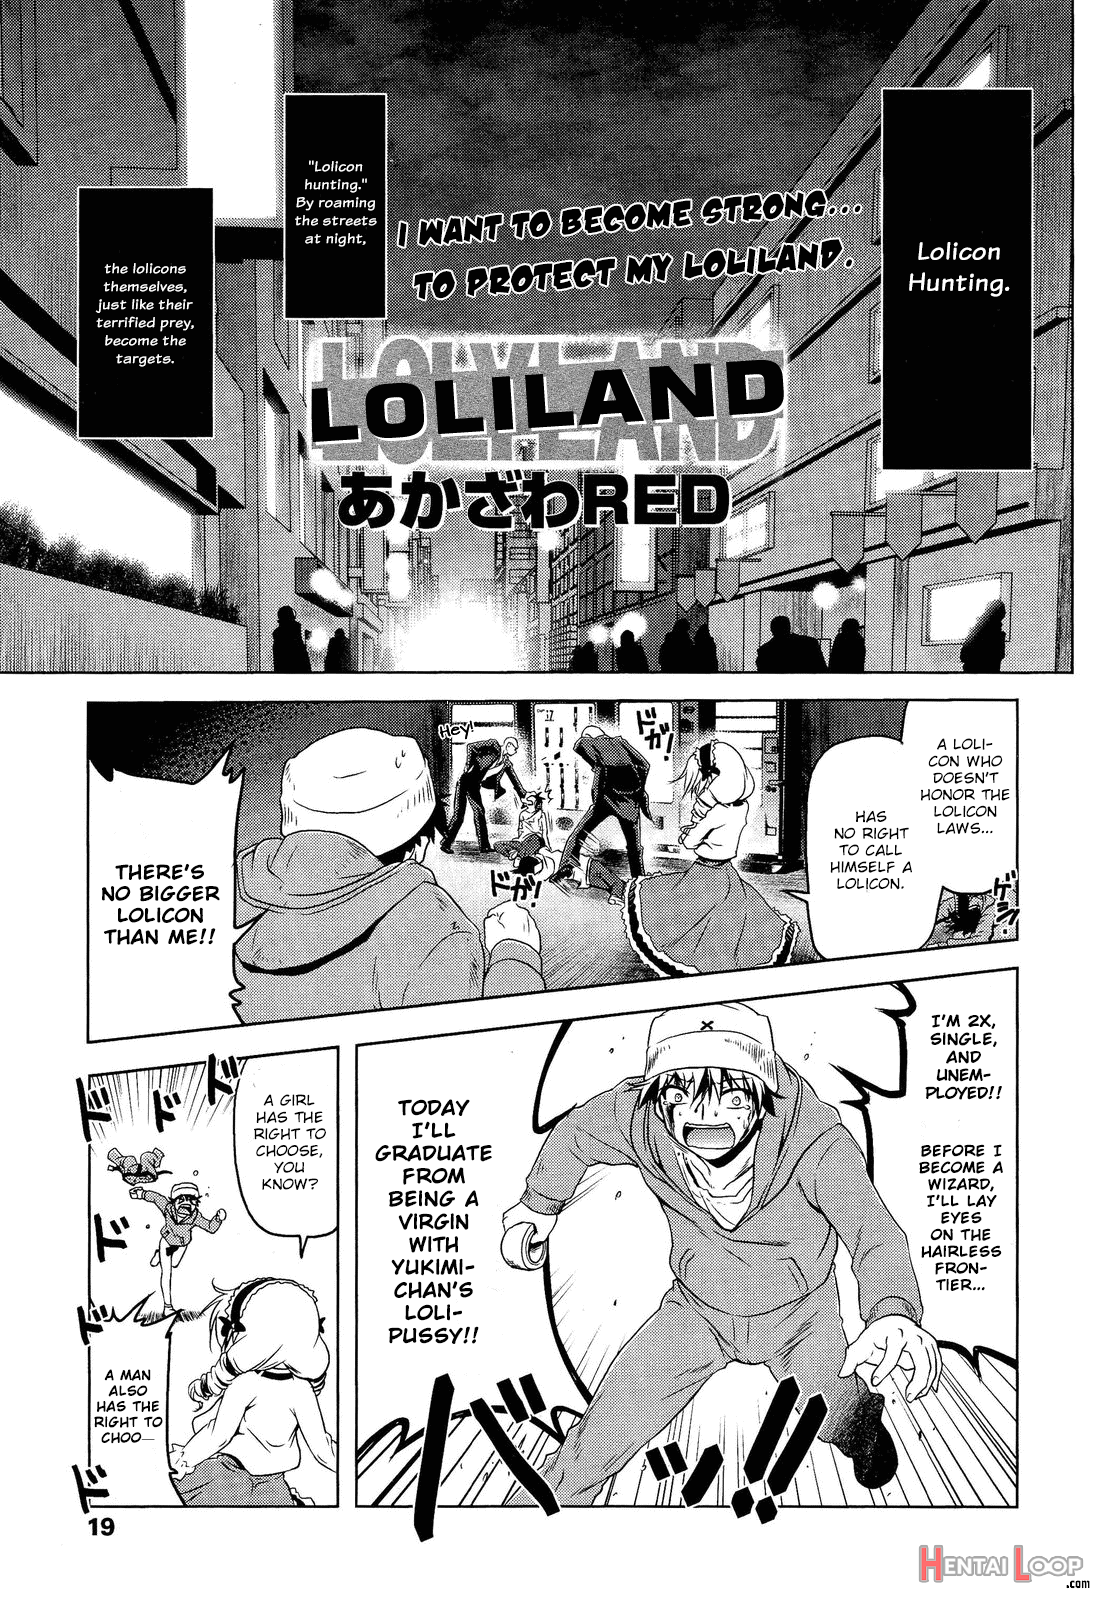 Loliland - Decensored page 1